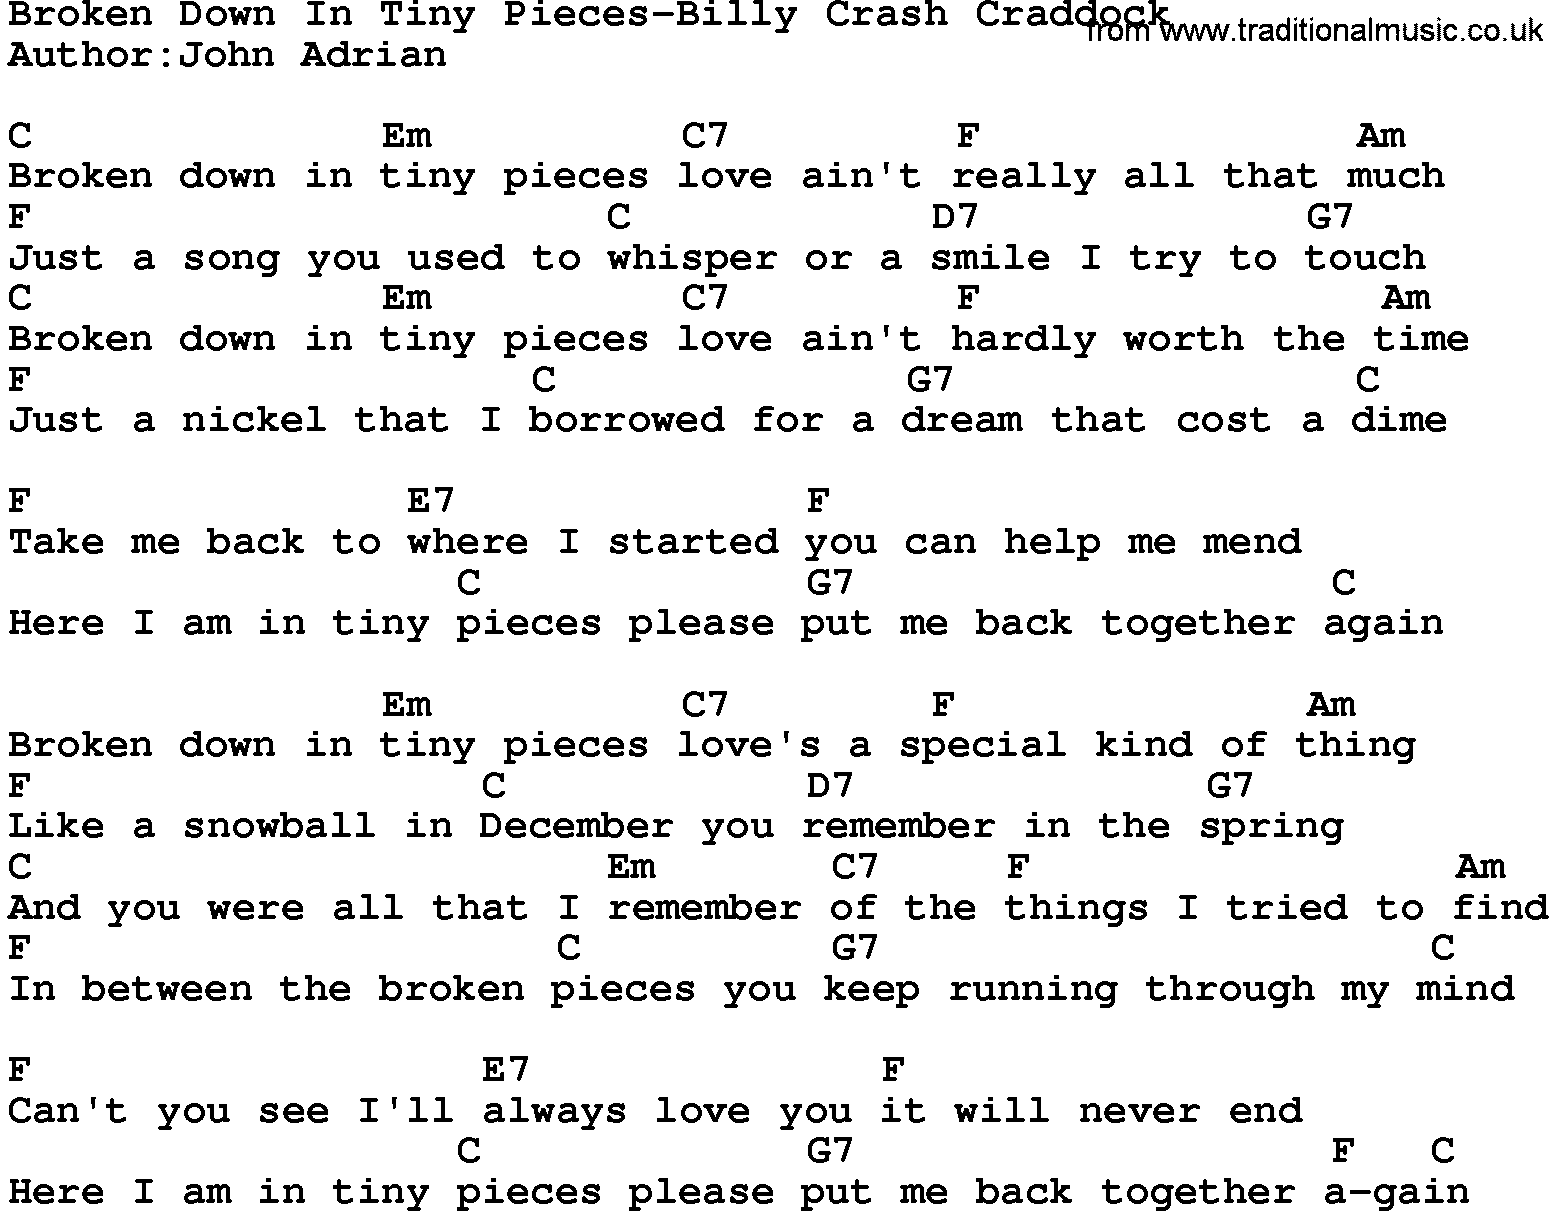 Country music song: Broken Down In Tiny Pieces-Billy Crash Craddock lyrics and chords